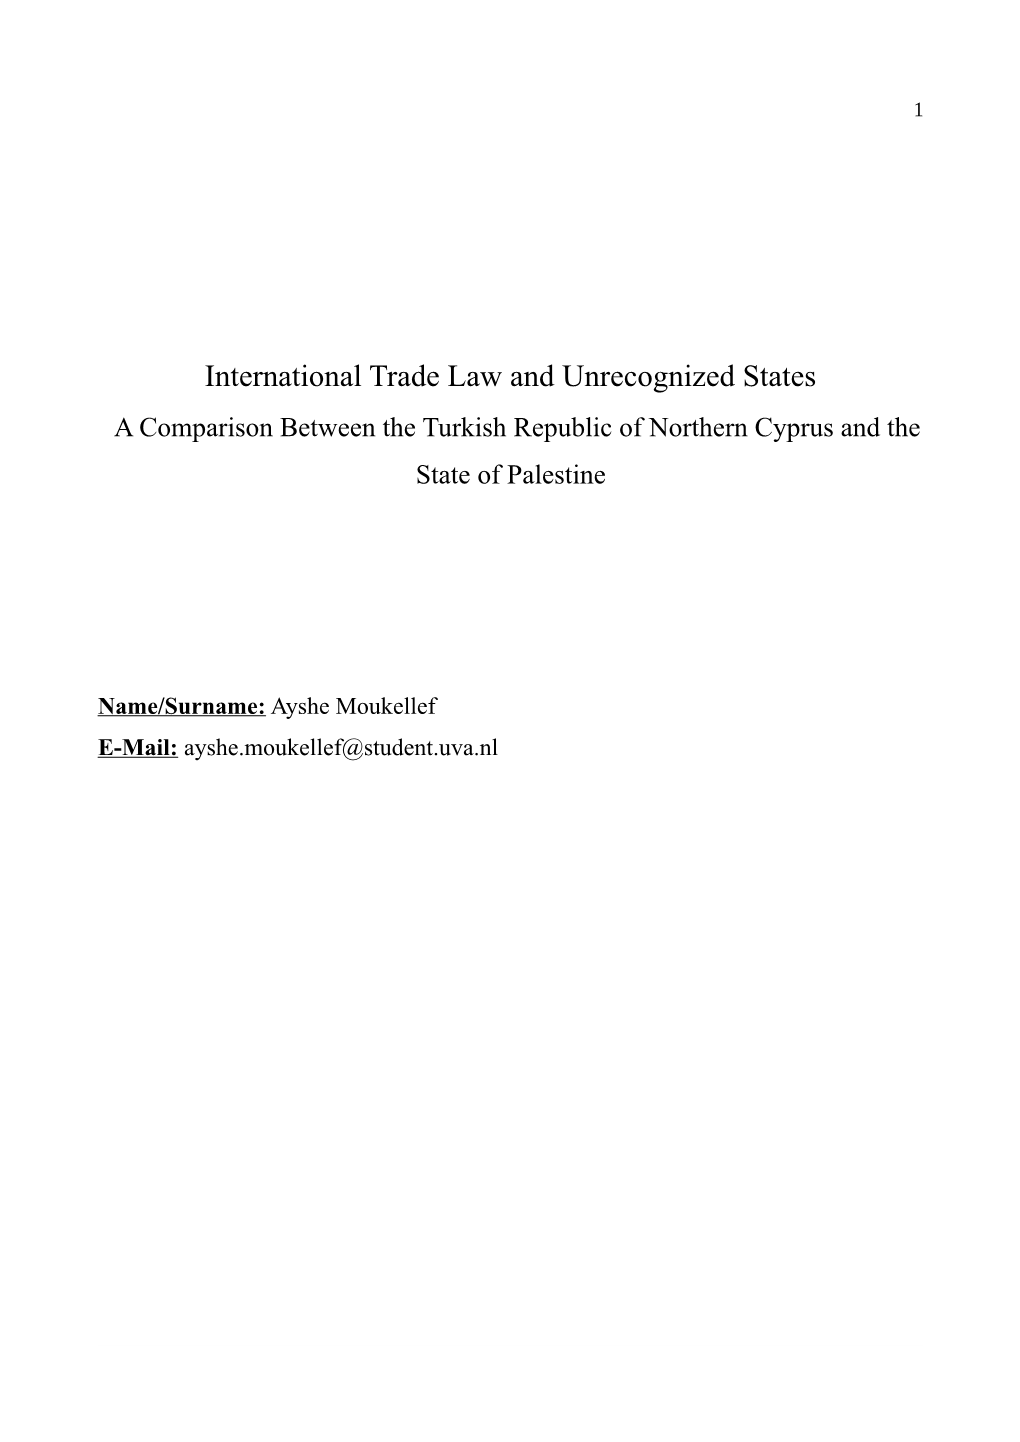 International Trade Law and Unrecognized States a Comparison Between the Turkish Republic of Northern Cyprus and the State of Palestine